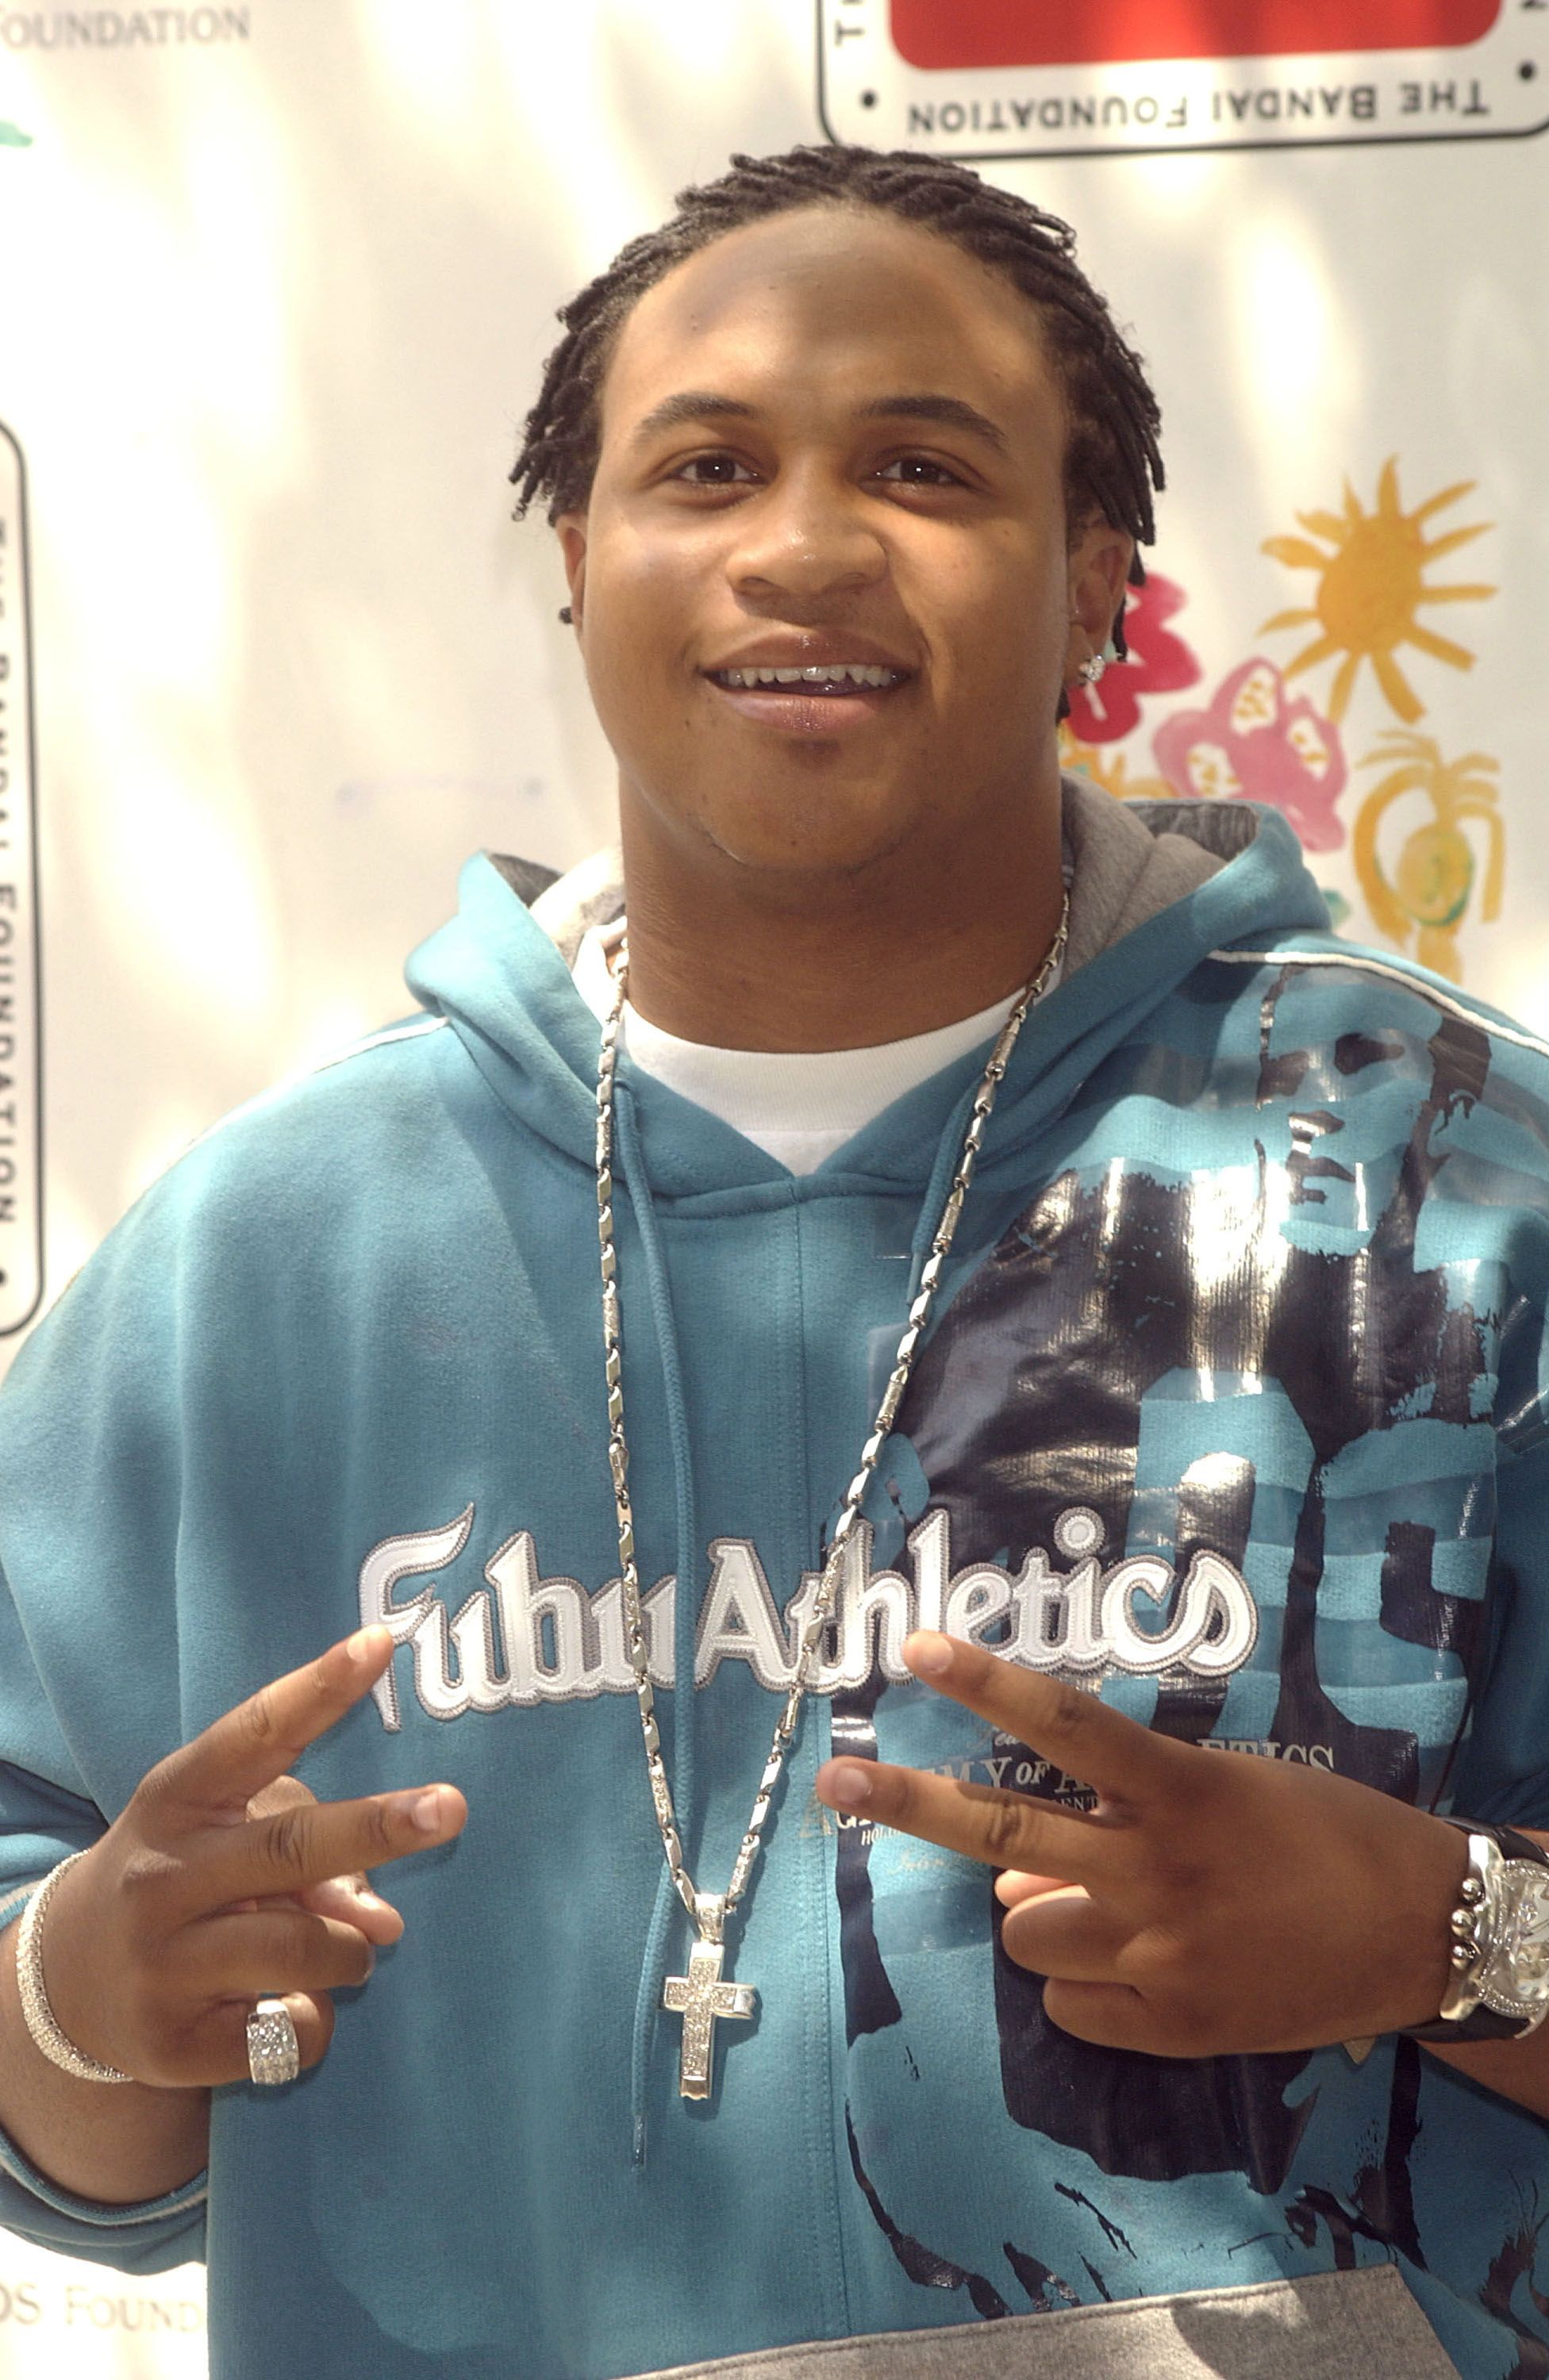 Orlando Brown arrives at the "Elizabeth Glaser Pediatric AIDS Foundation Benefit" in 2004 in New York | Photo: Getty Images